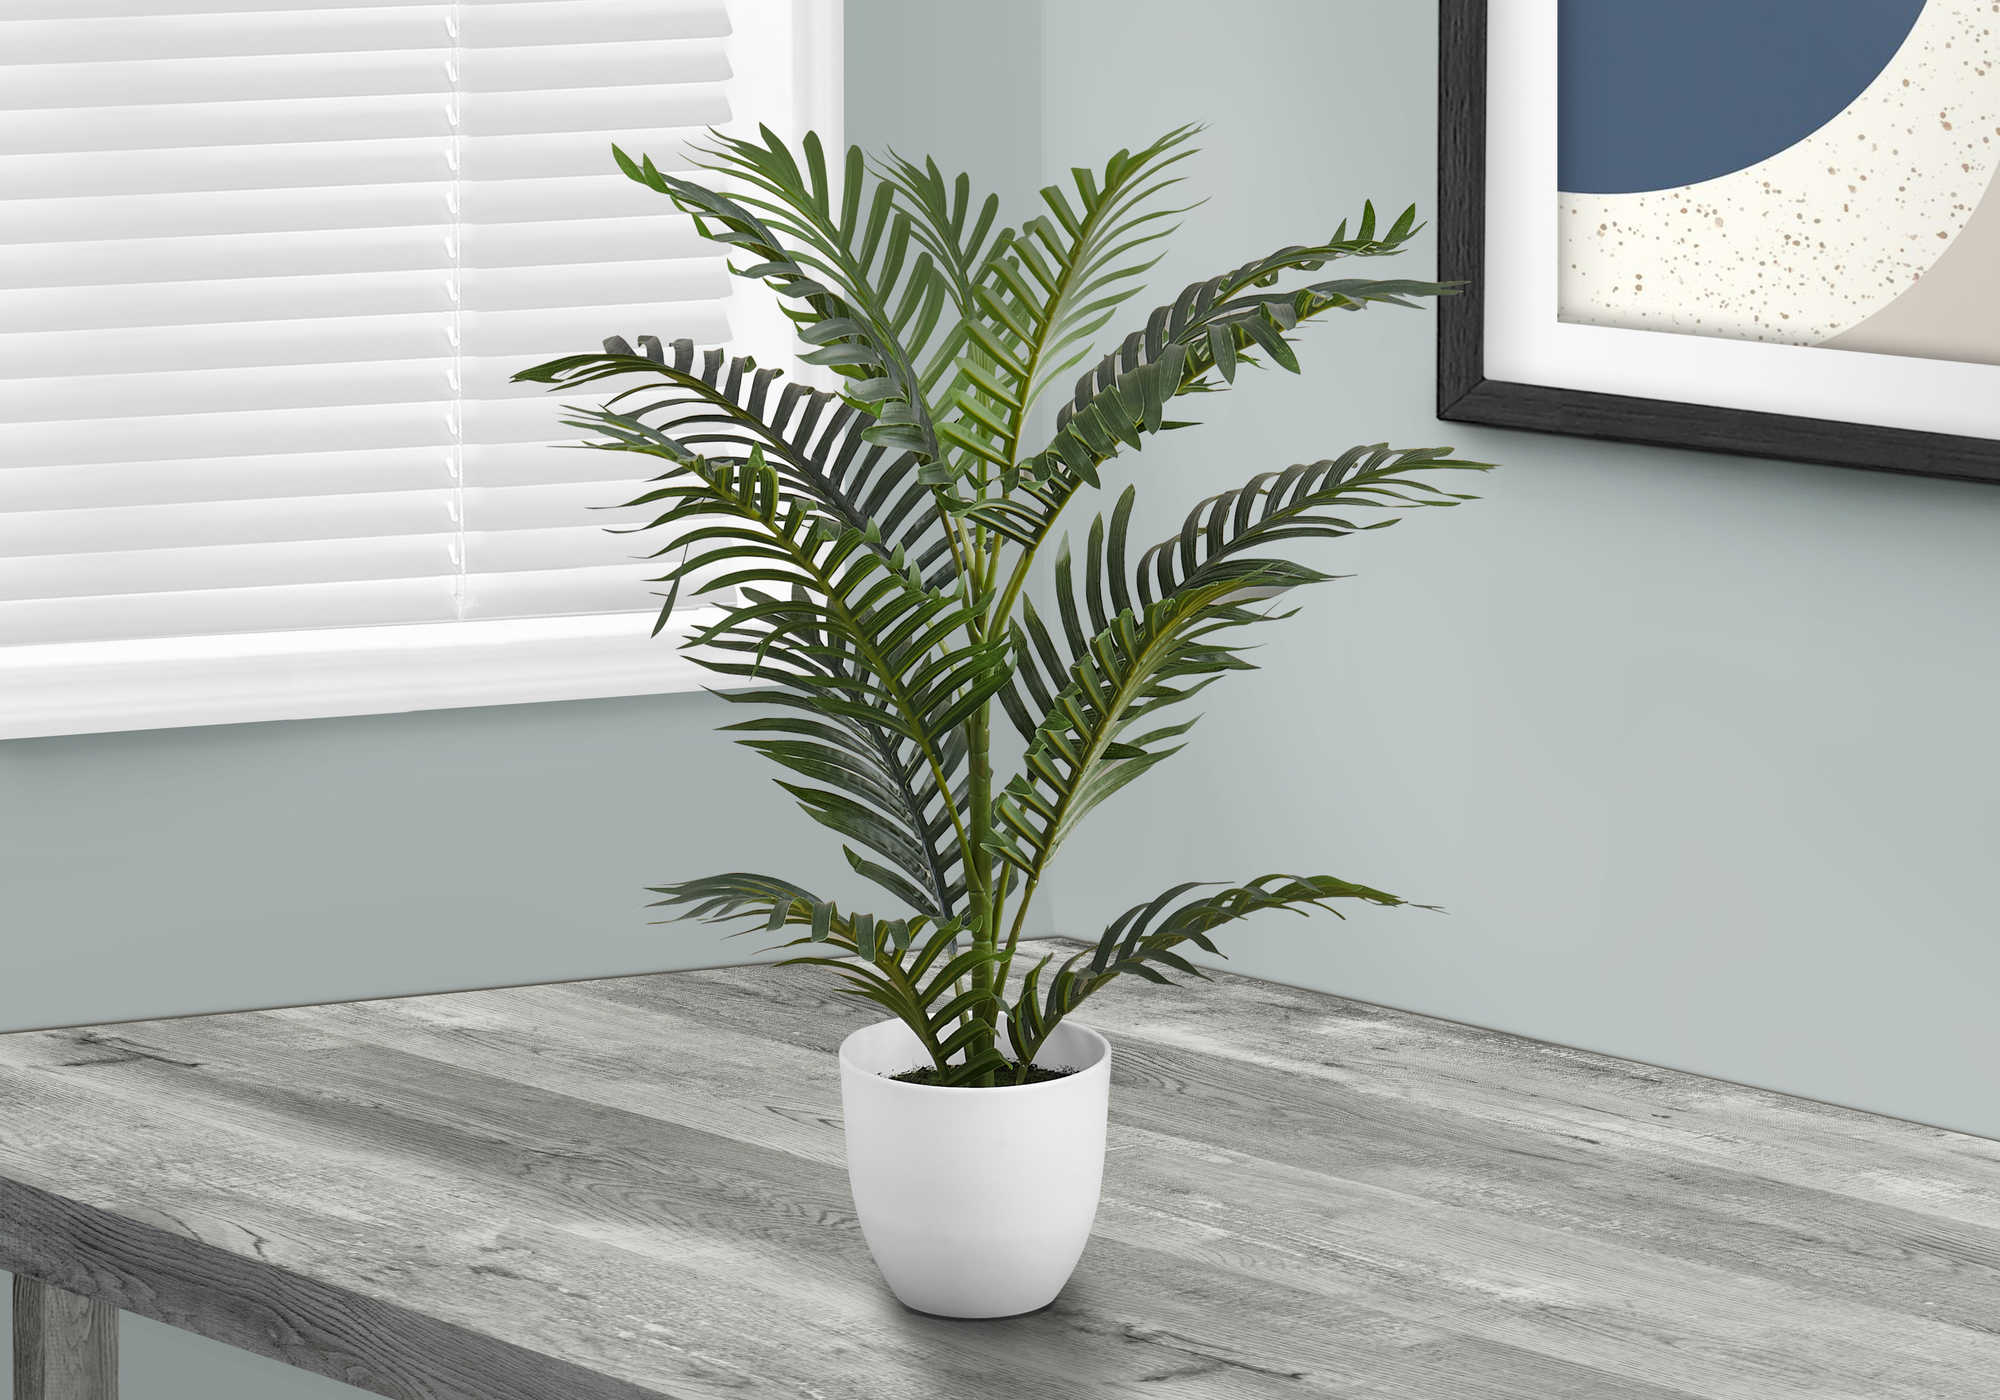 ARTIFICIAL PLANT - 28"H / INDOOR PALM IN A 6" POT